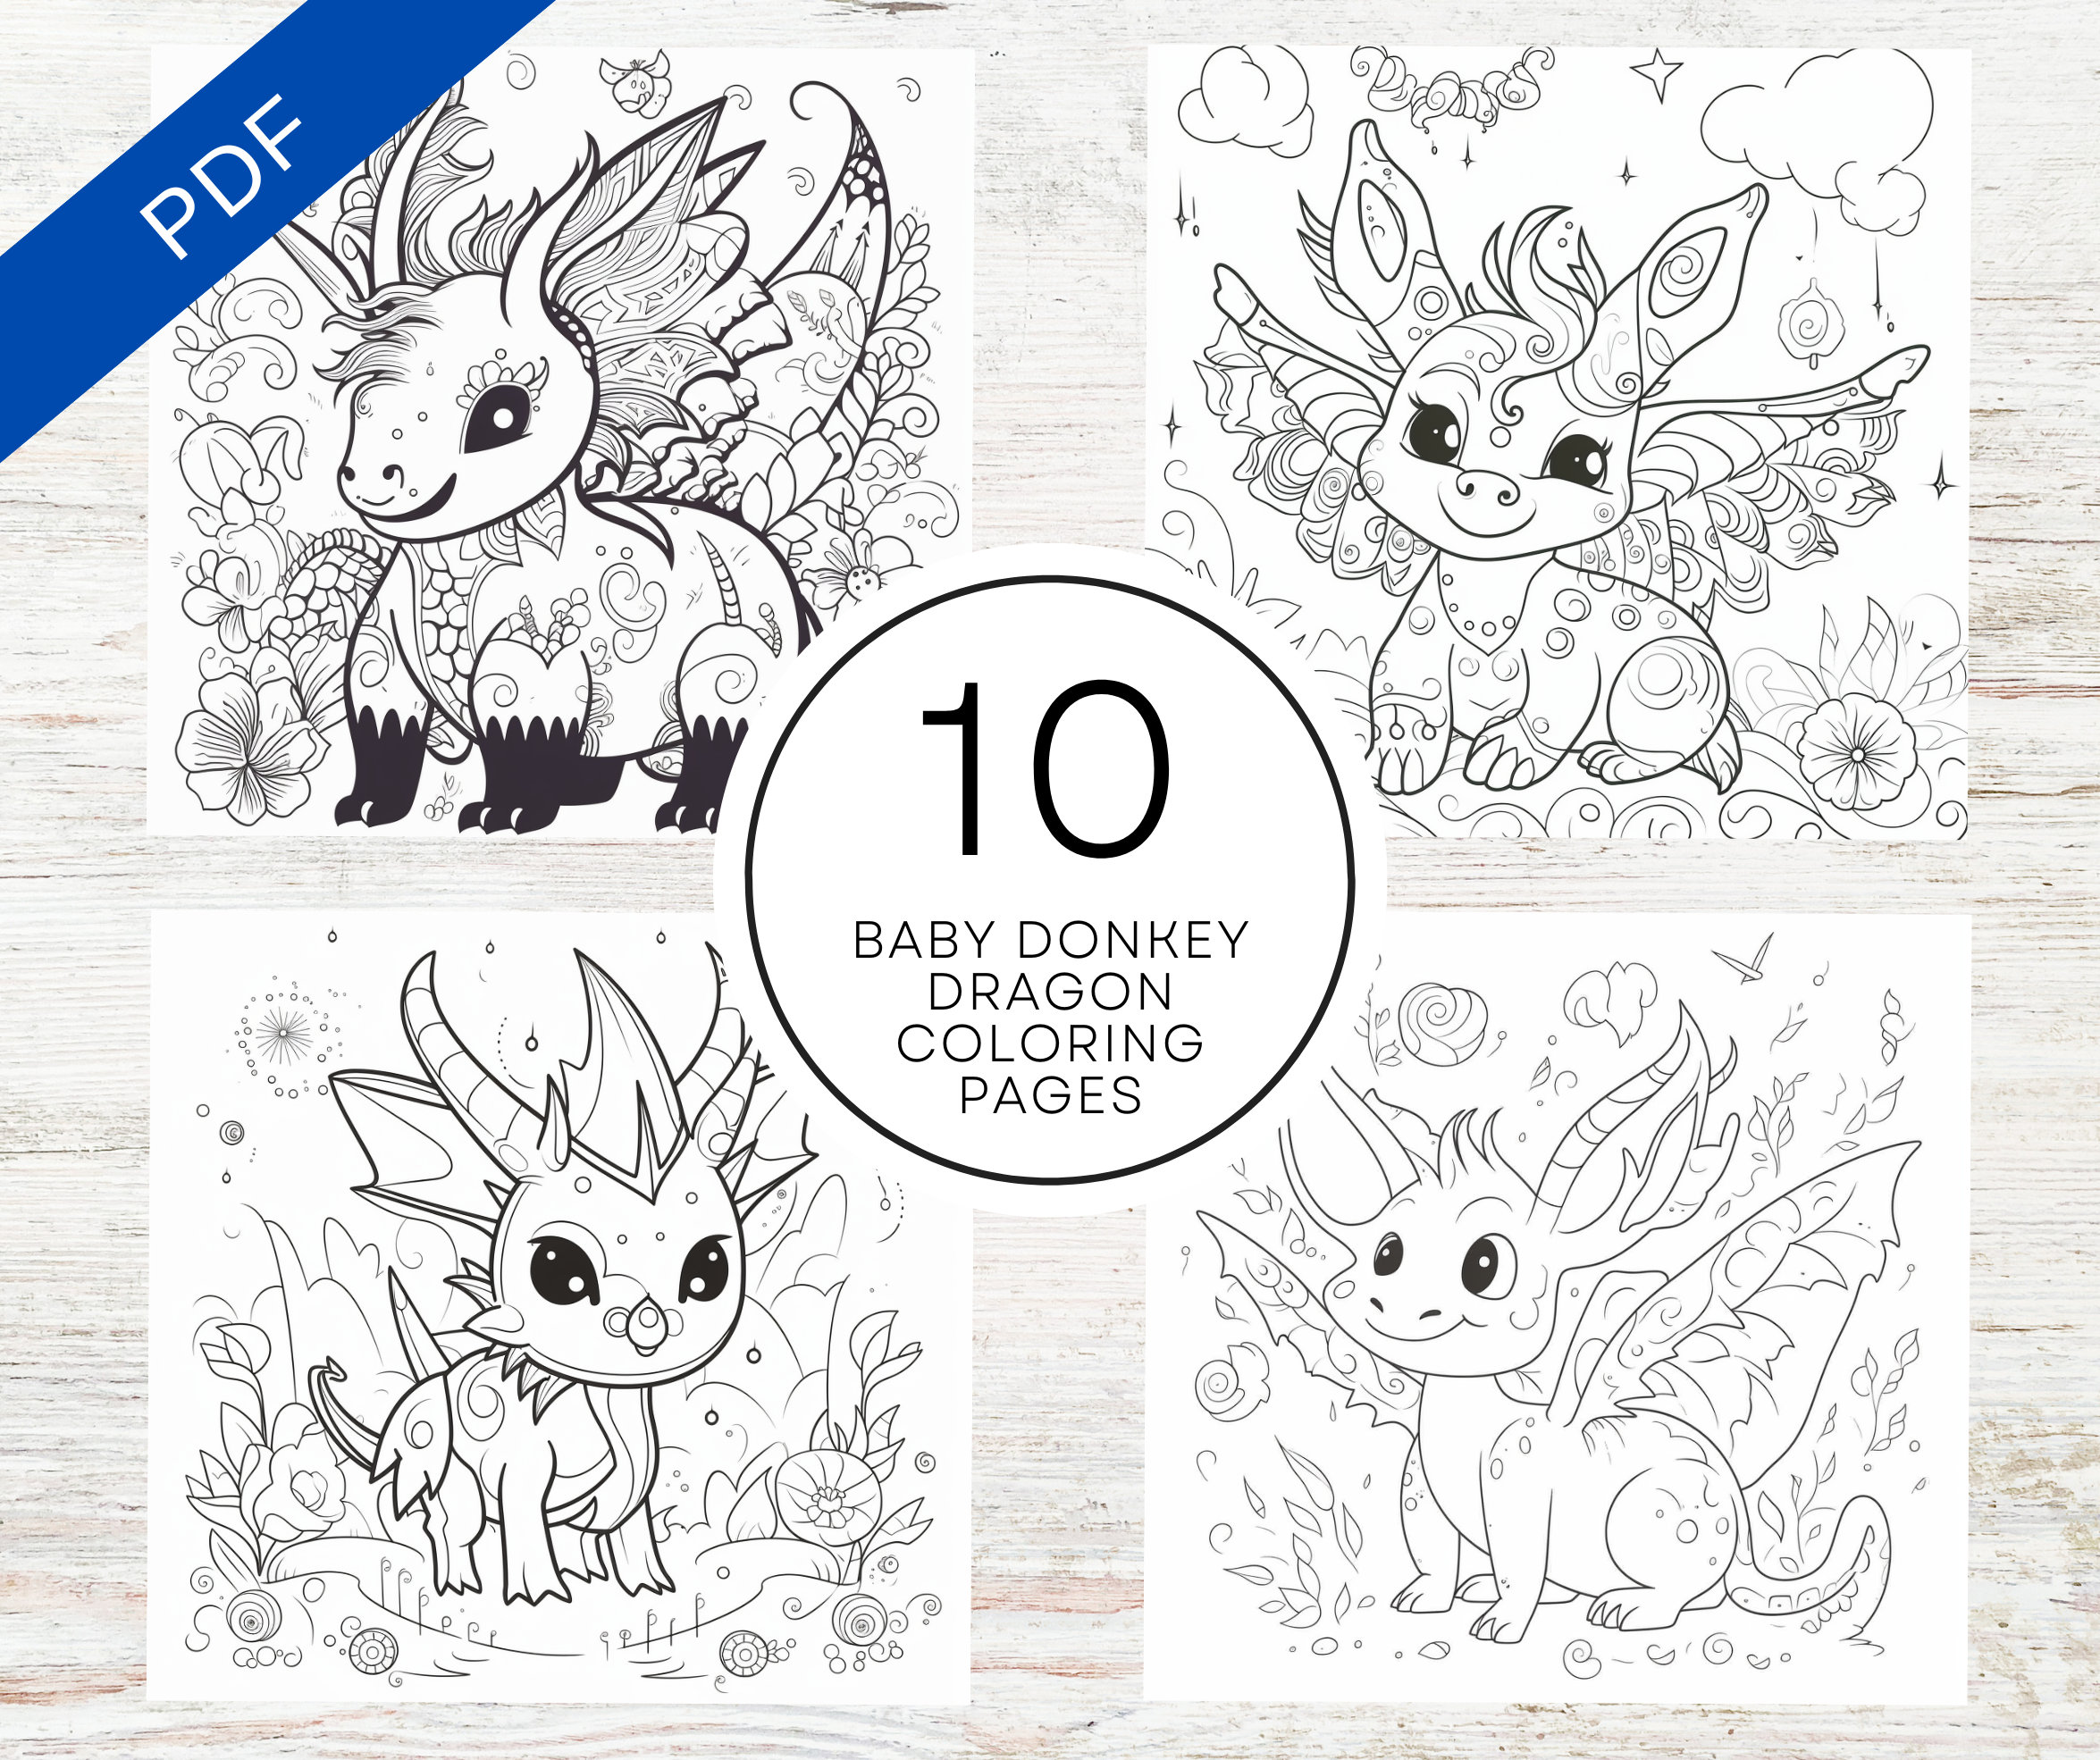 Baby donkey dragon coloring pages printable pdf a cute magical coloring sheets for kids adults